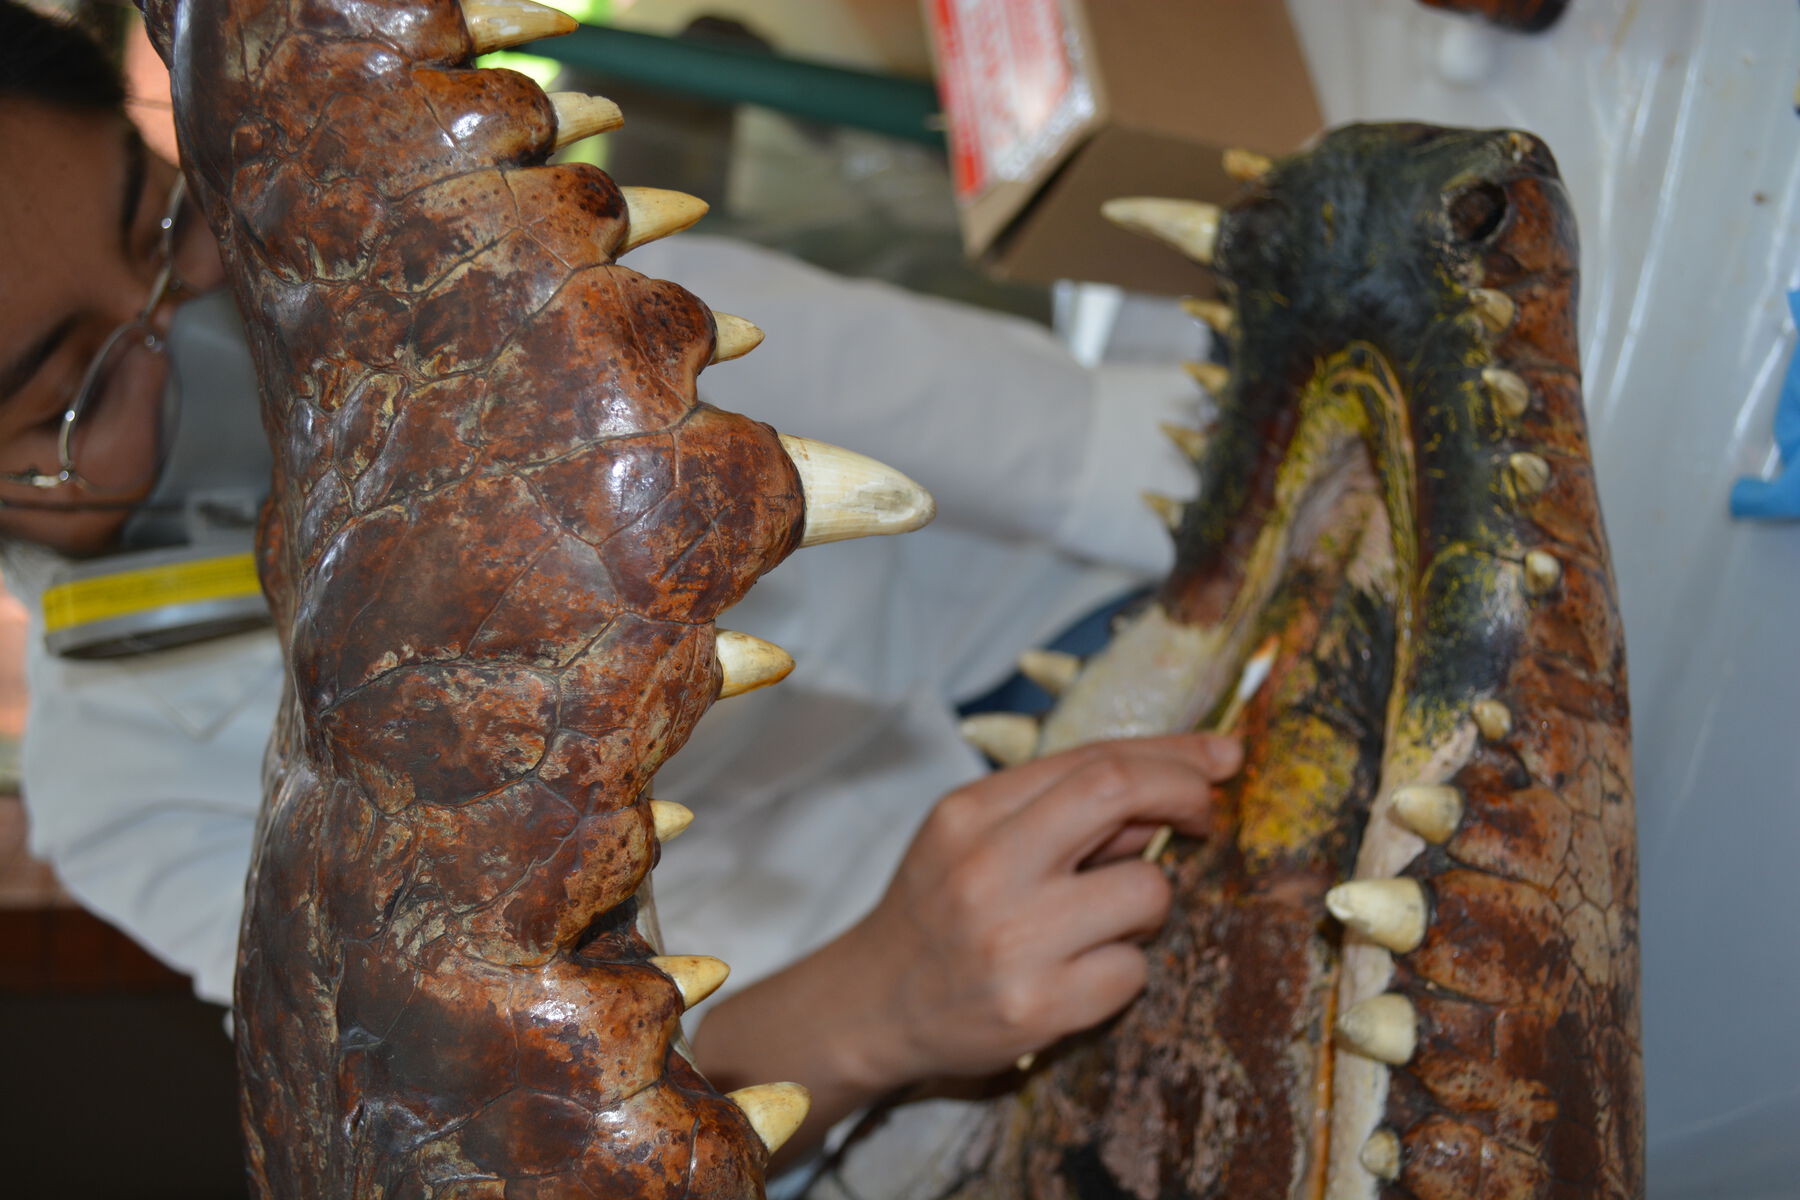 A close-up view of a person inspecting the mouth of the taxidermied crocodile by using a q-tip